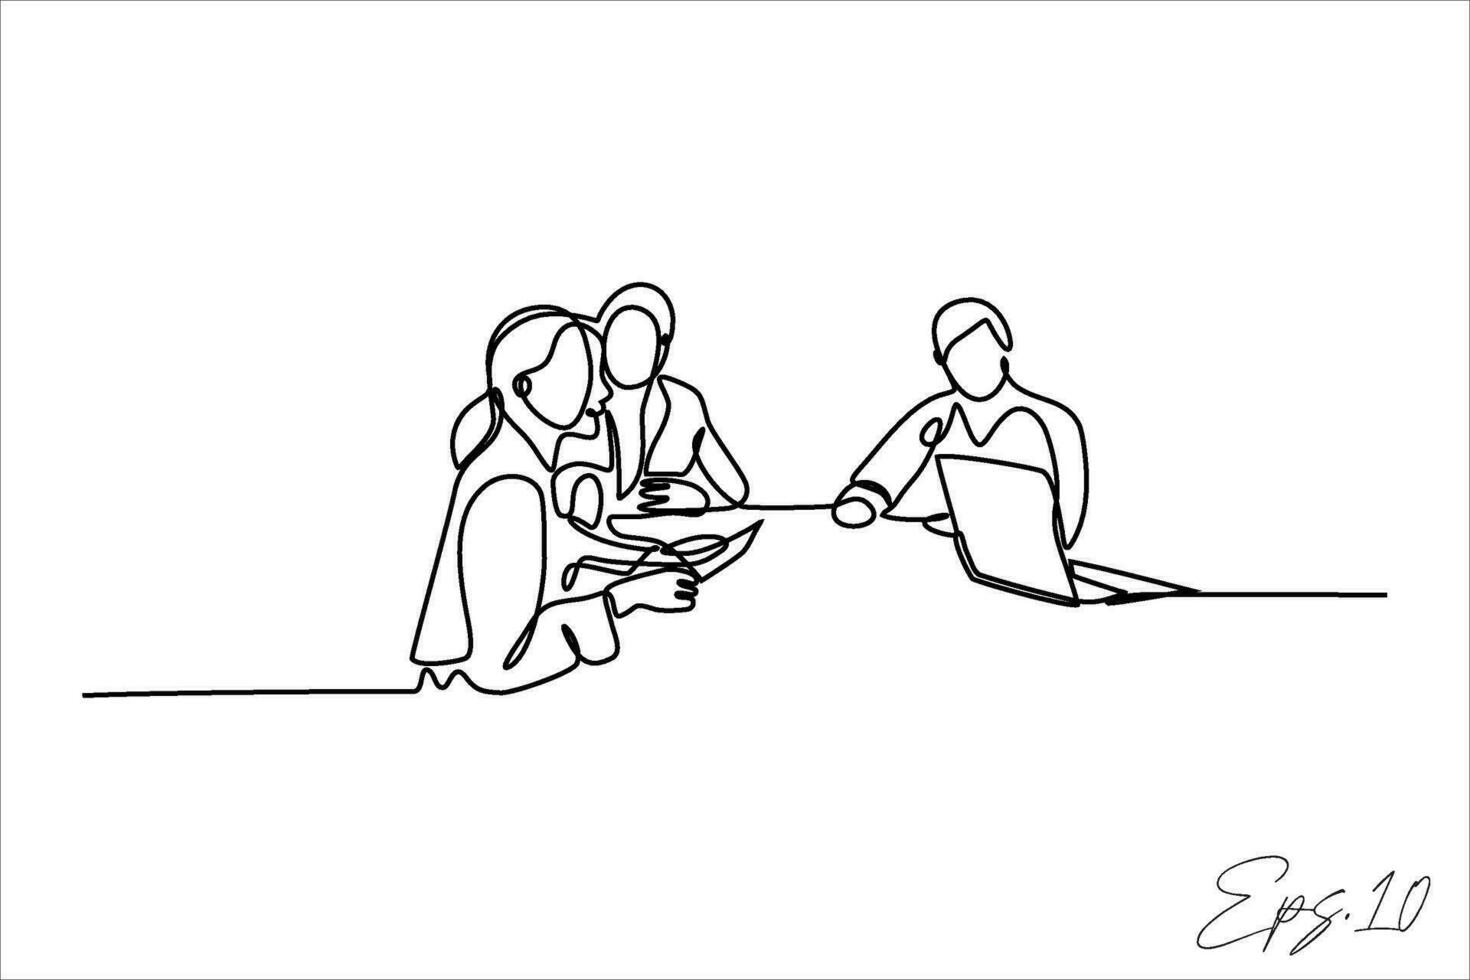 continuous line vector illustration design of an office employee having a discussion